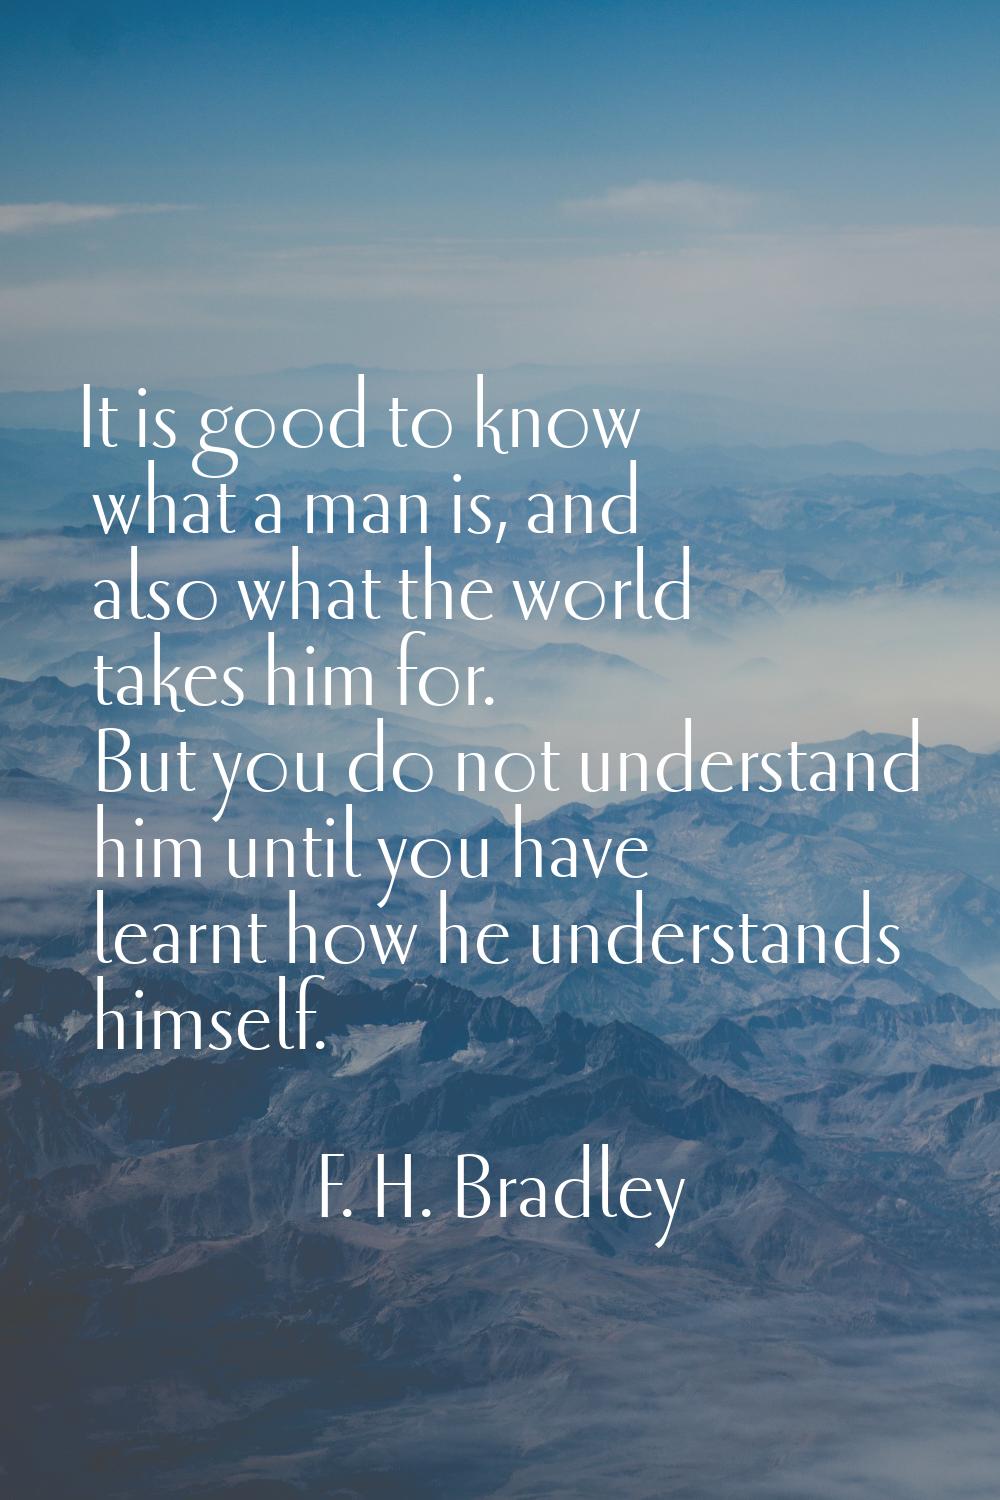 It is good to know what a man is, and also what the world takes him for. But you do not understand 